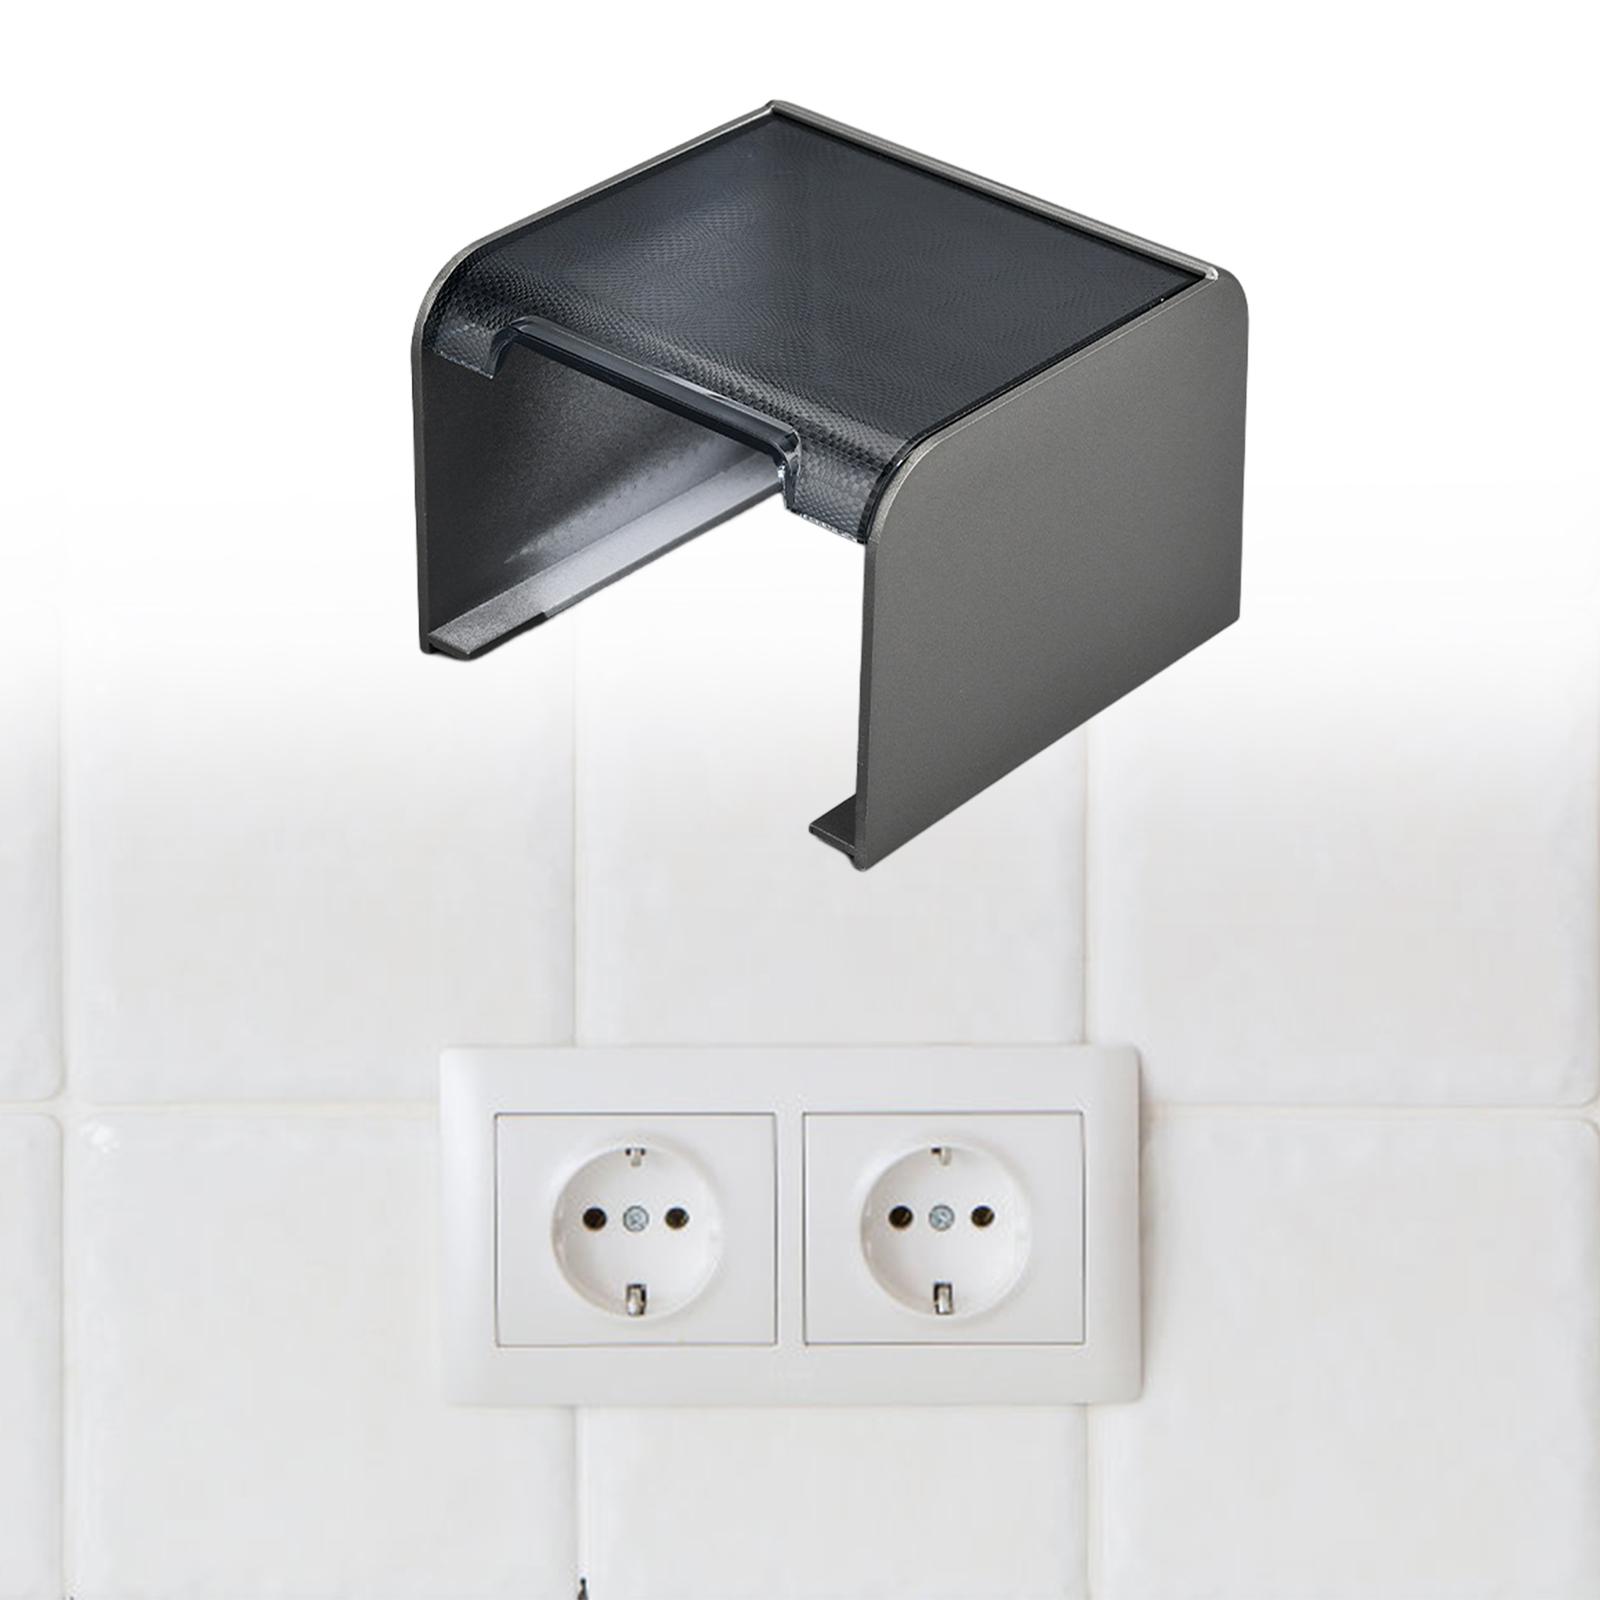 Socket Cover Plug Protector Easy to Use Outlet Box Durable Wall Switch Cover Gray